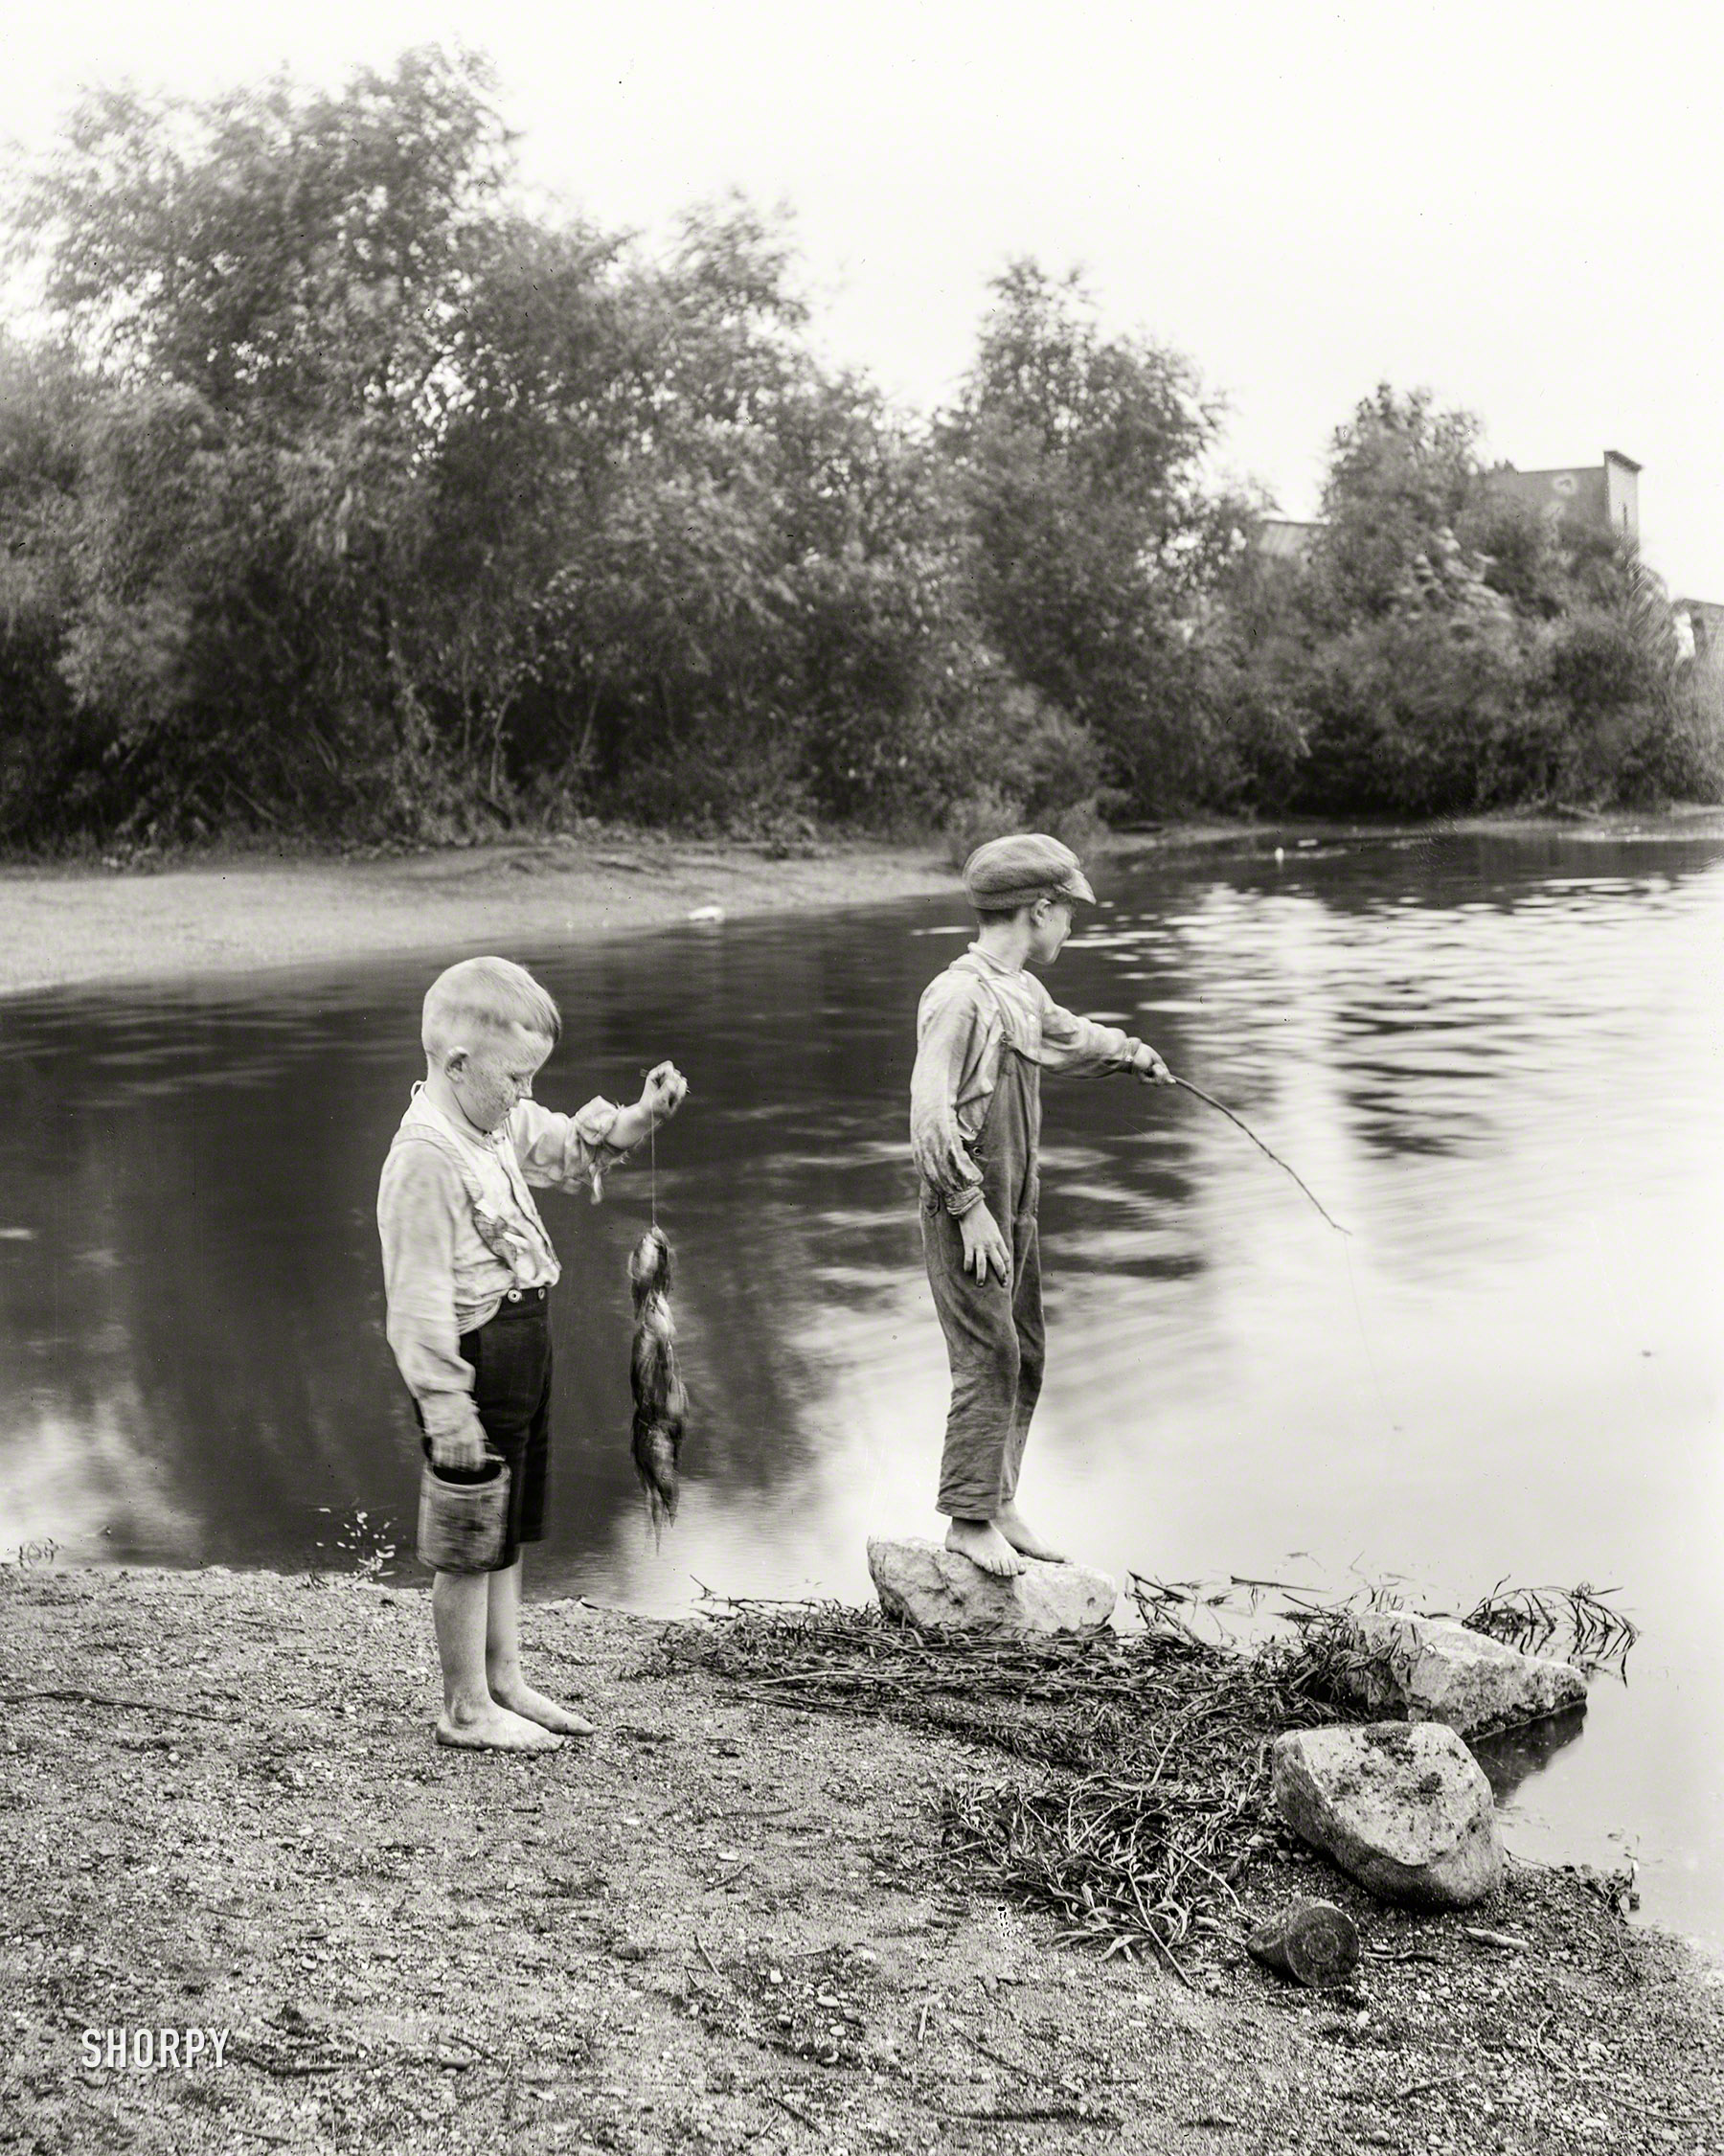 1901. "Fishermen at Summit, Ill's." 8x10 inch dry plate glass negative, Detroit Photographic Company. View full size.